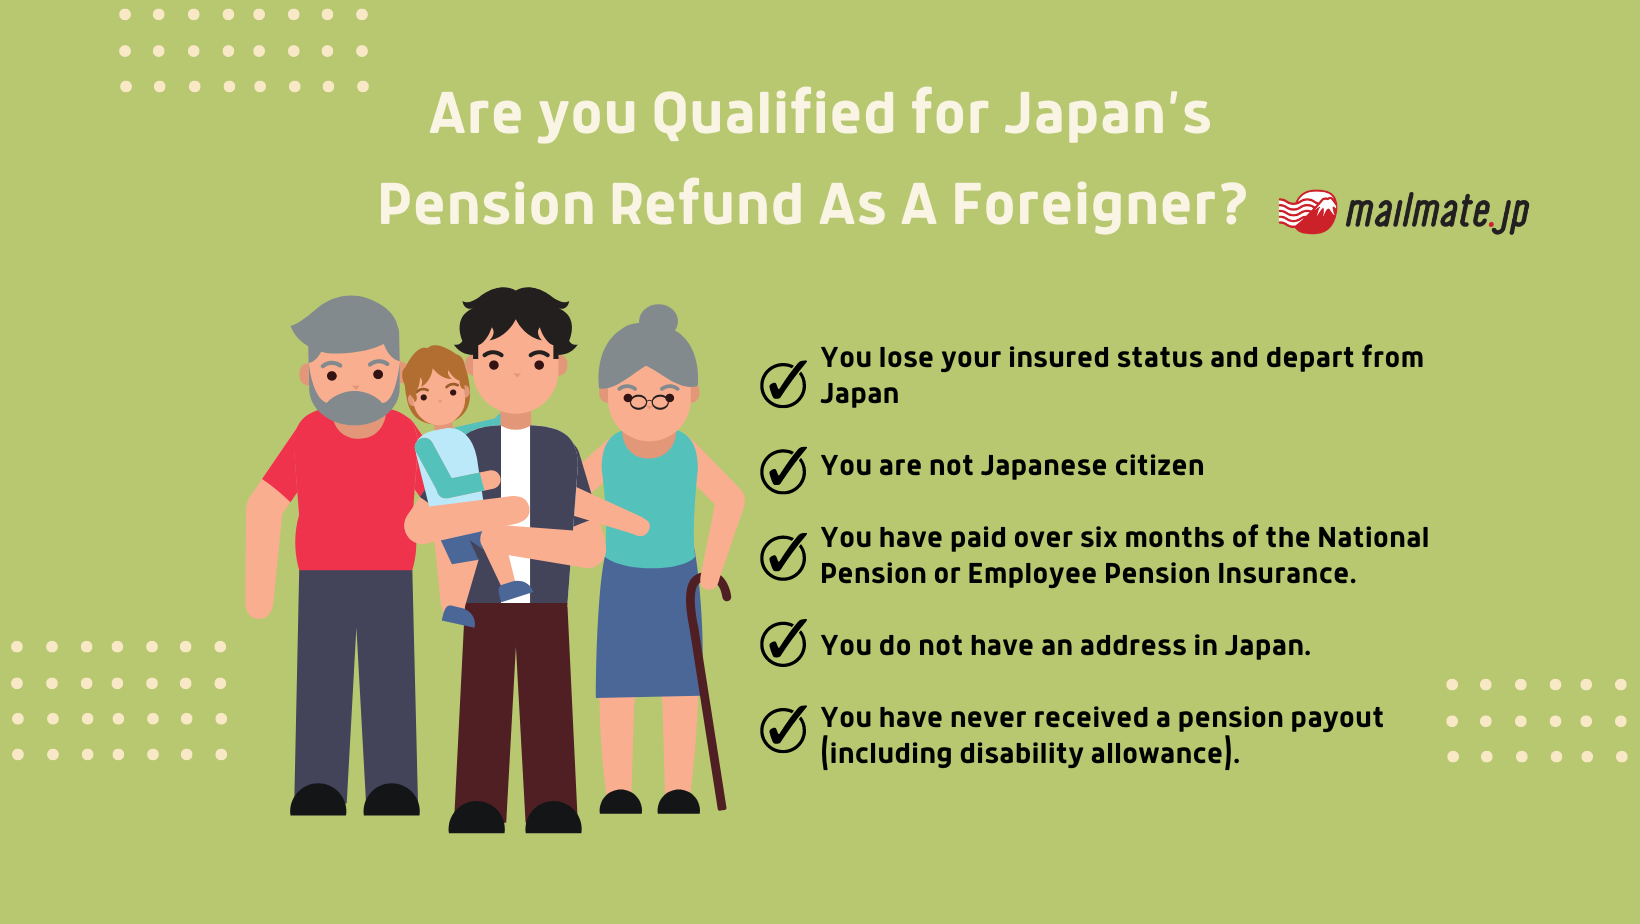 Japan’s Pension Refund for Foreigners [Updated 2022]